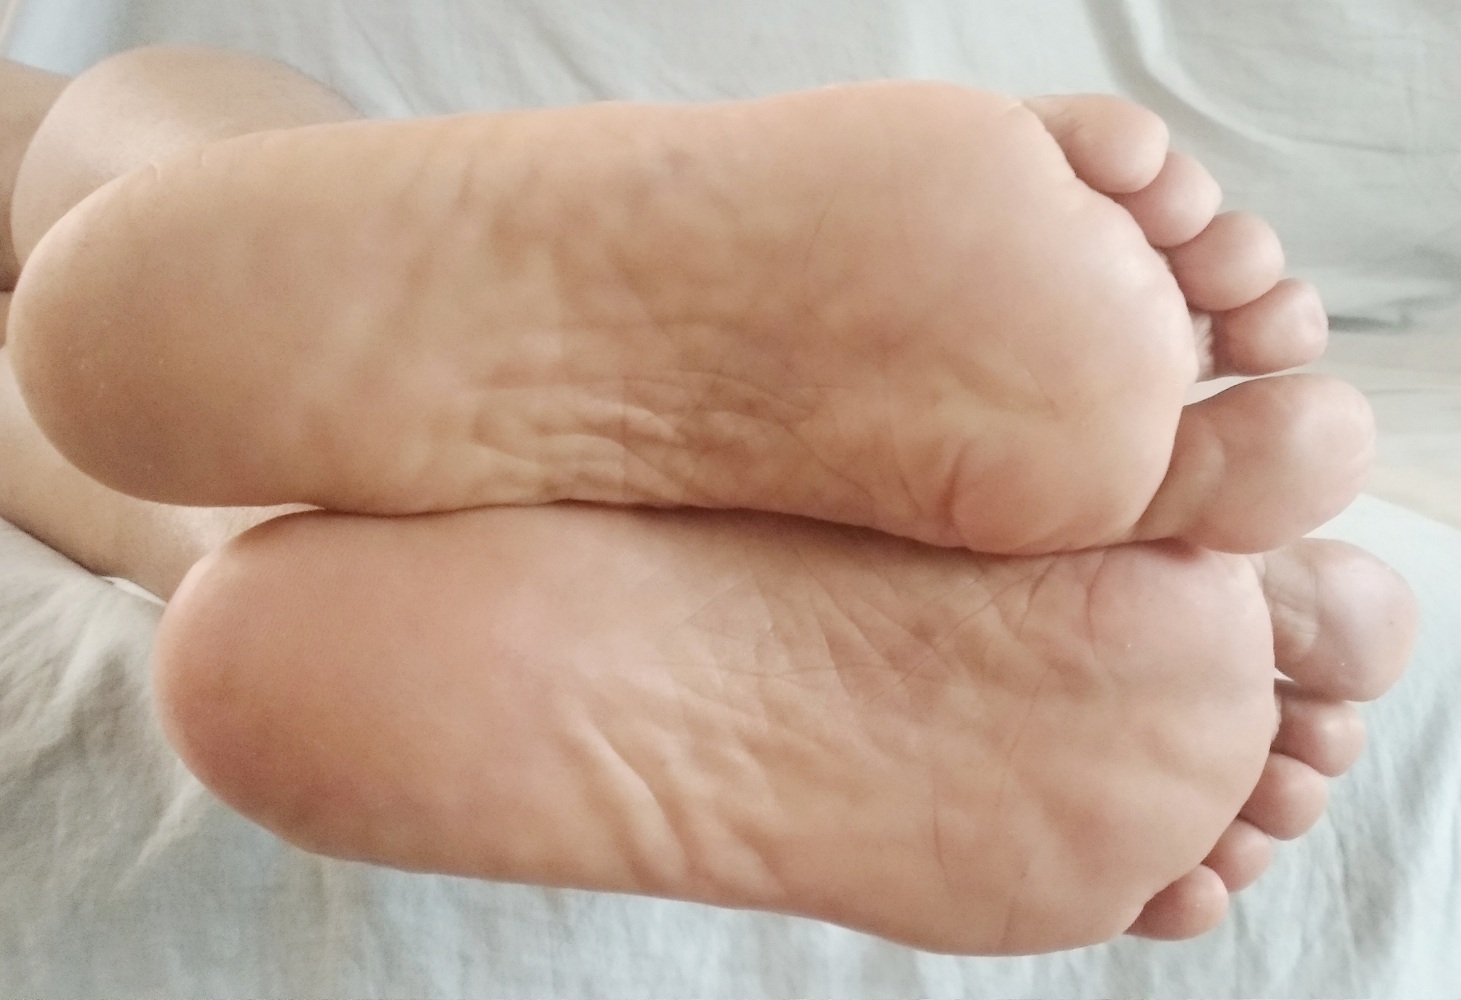 Very soft soles pic